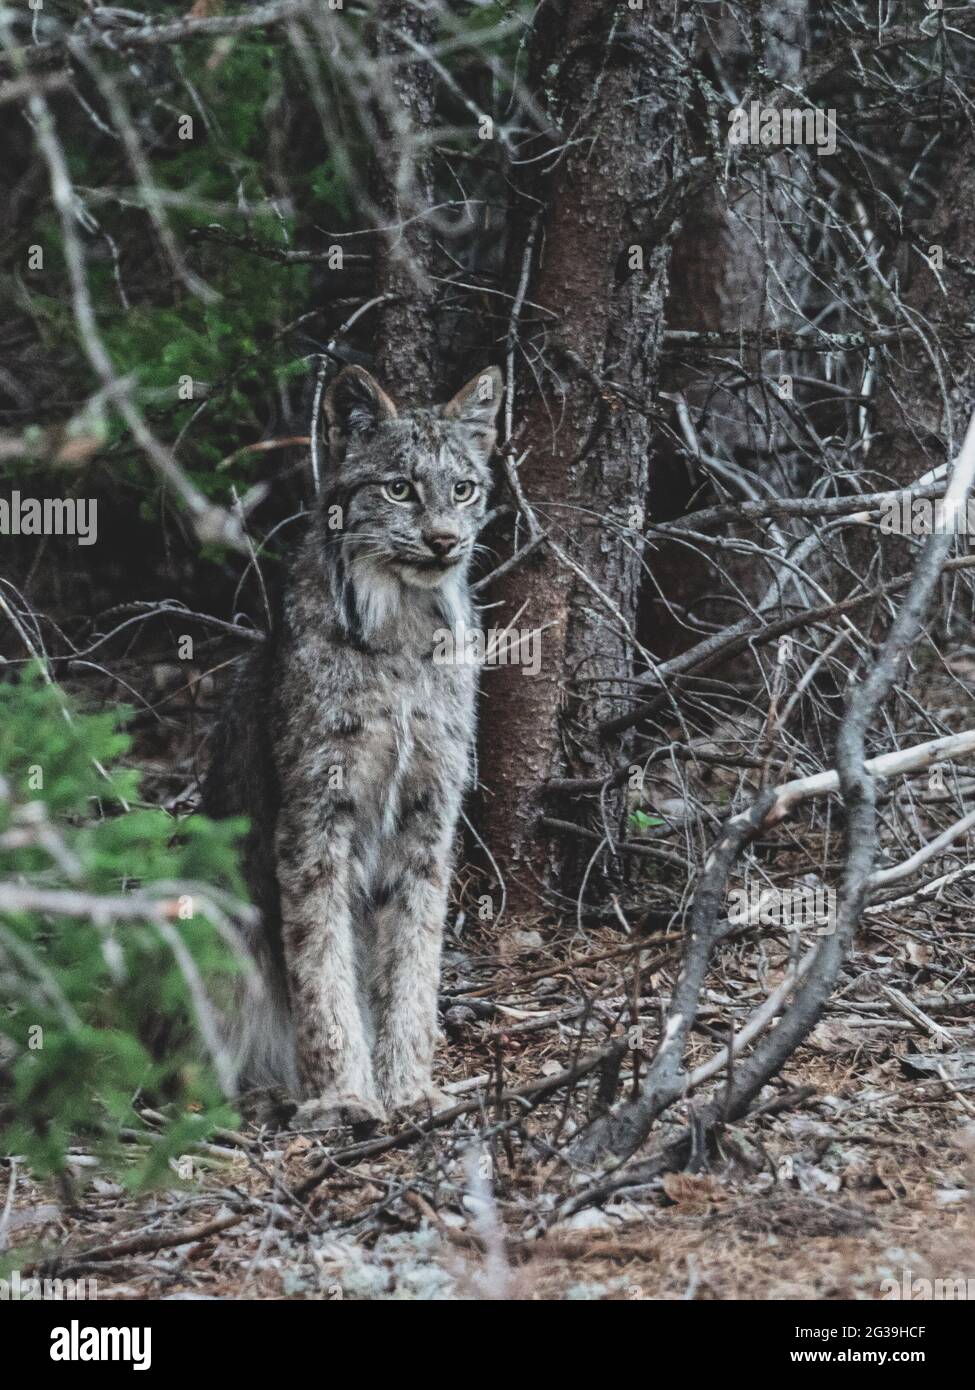 Lynx ( wildcat ) standing in a forest, wildlife Stock Photo